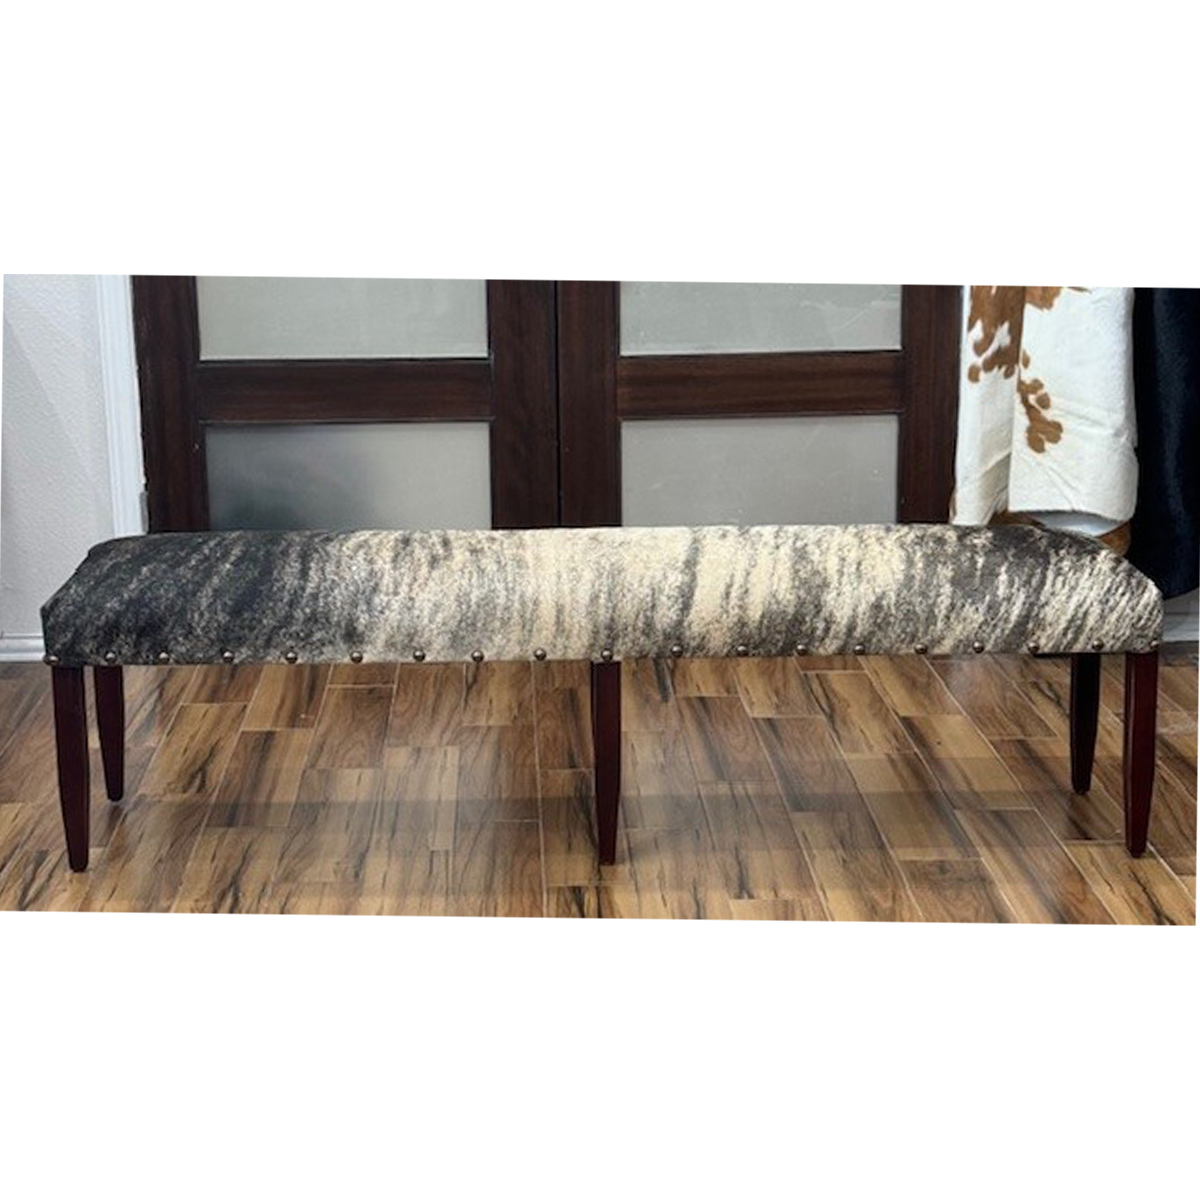 6 Foot Cowhide Bench